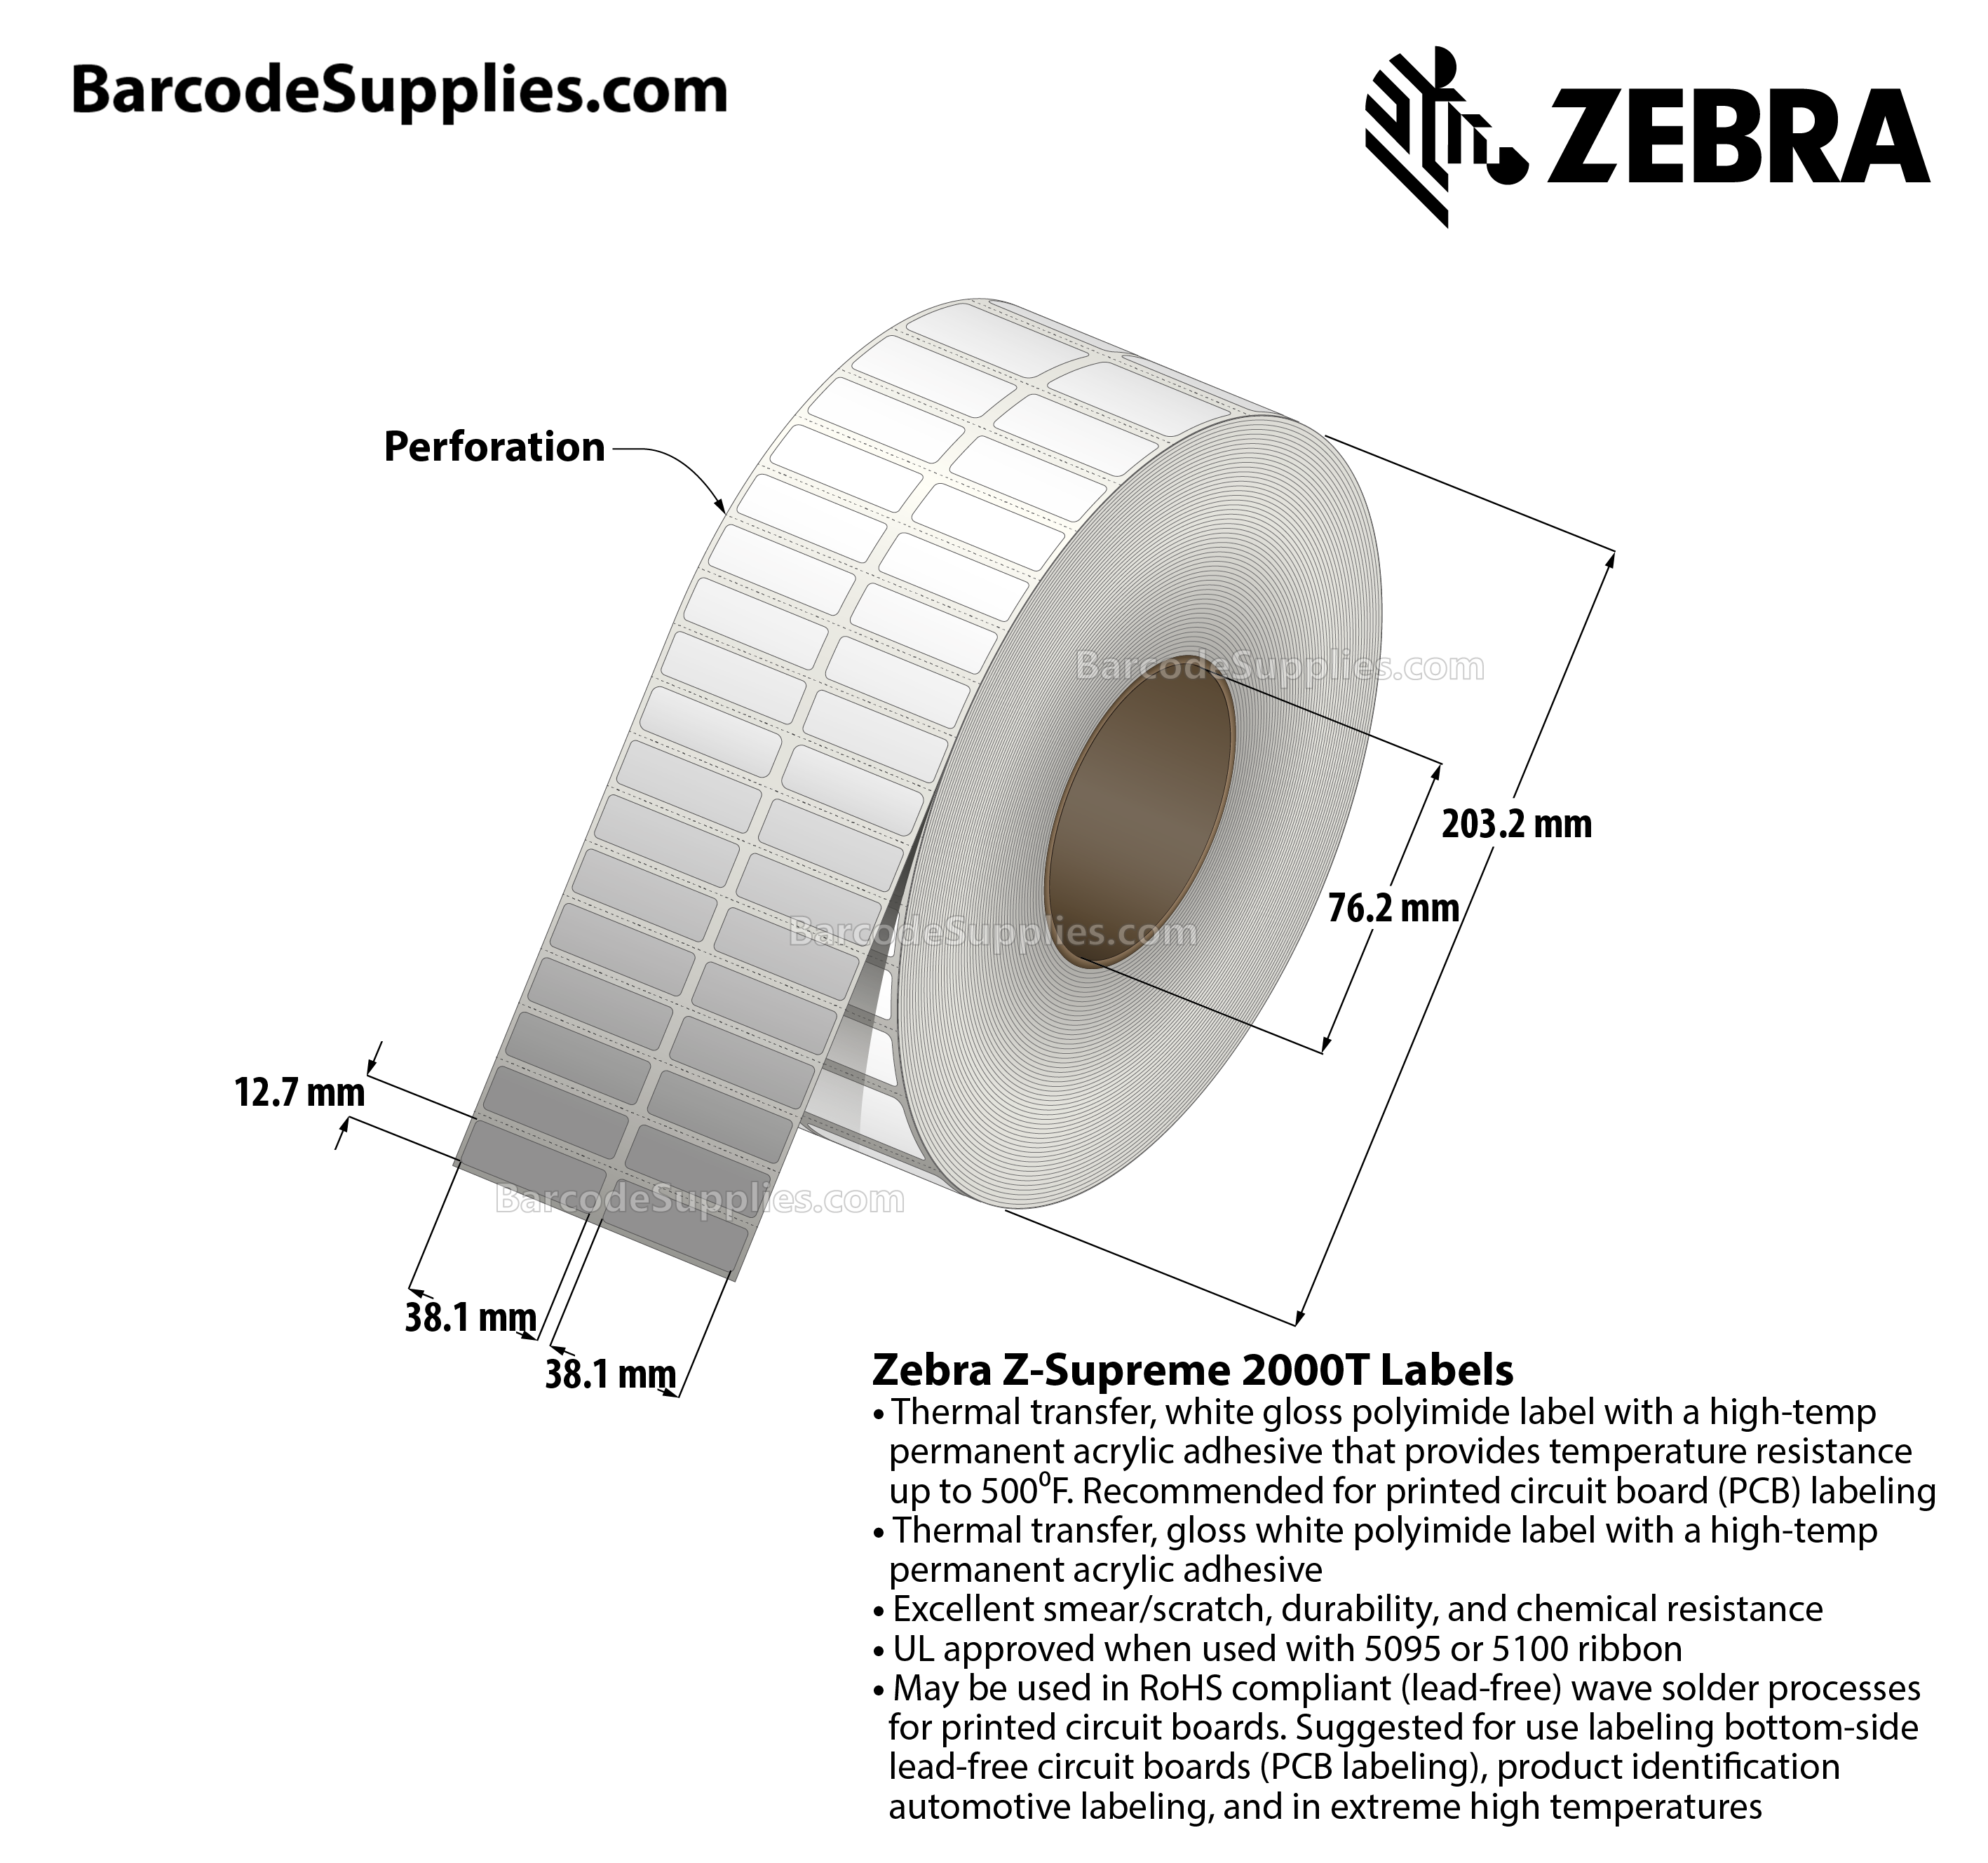 1.5 x 0.5 Thermal Transfer White Z-Supreme 2000T (2-Across) Labels With High-temp Adhesive - Perforated - 10000 Labels Per Roll - Carton Of 1 Rolls - 10000 Labels Total - MPN: 10023210